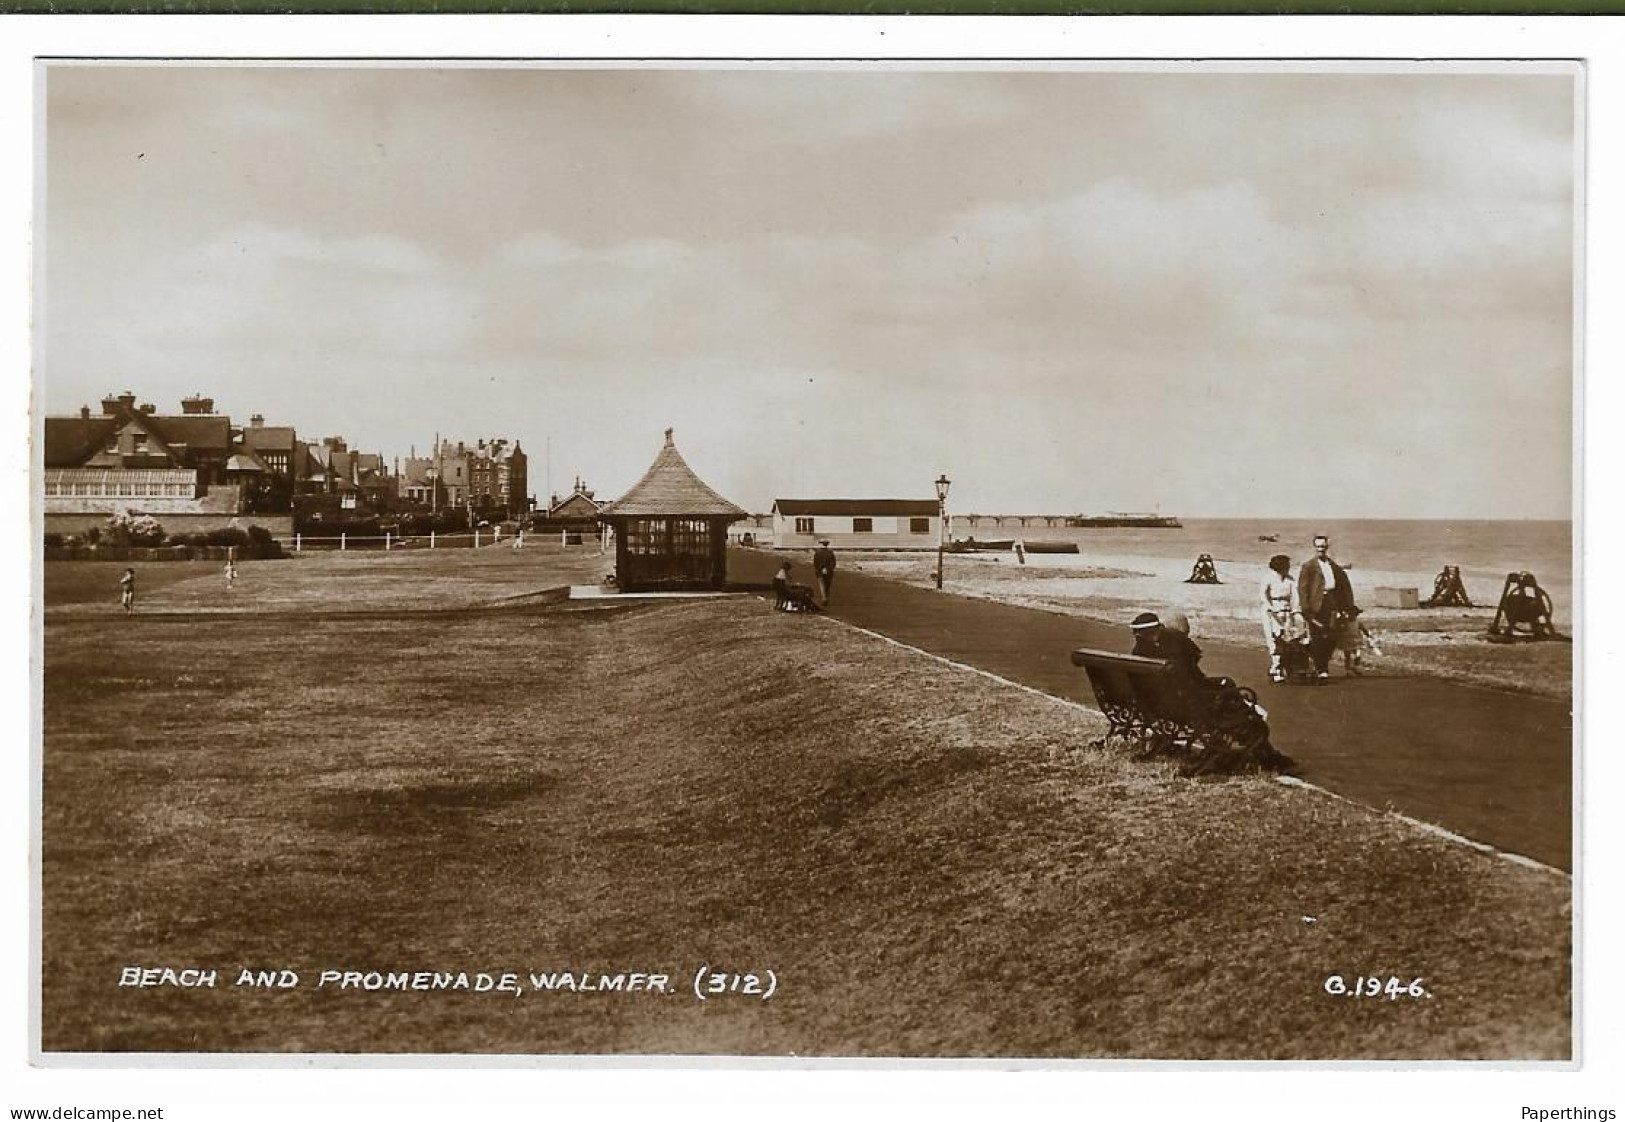 Real Photo Postcard, Kent, Dover, Walmer, Beach And Promenade, House, Footpath, Seaview - Dover